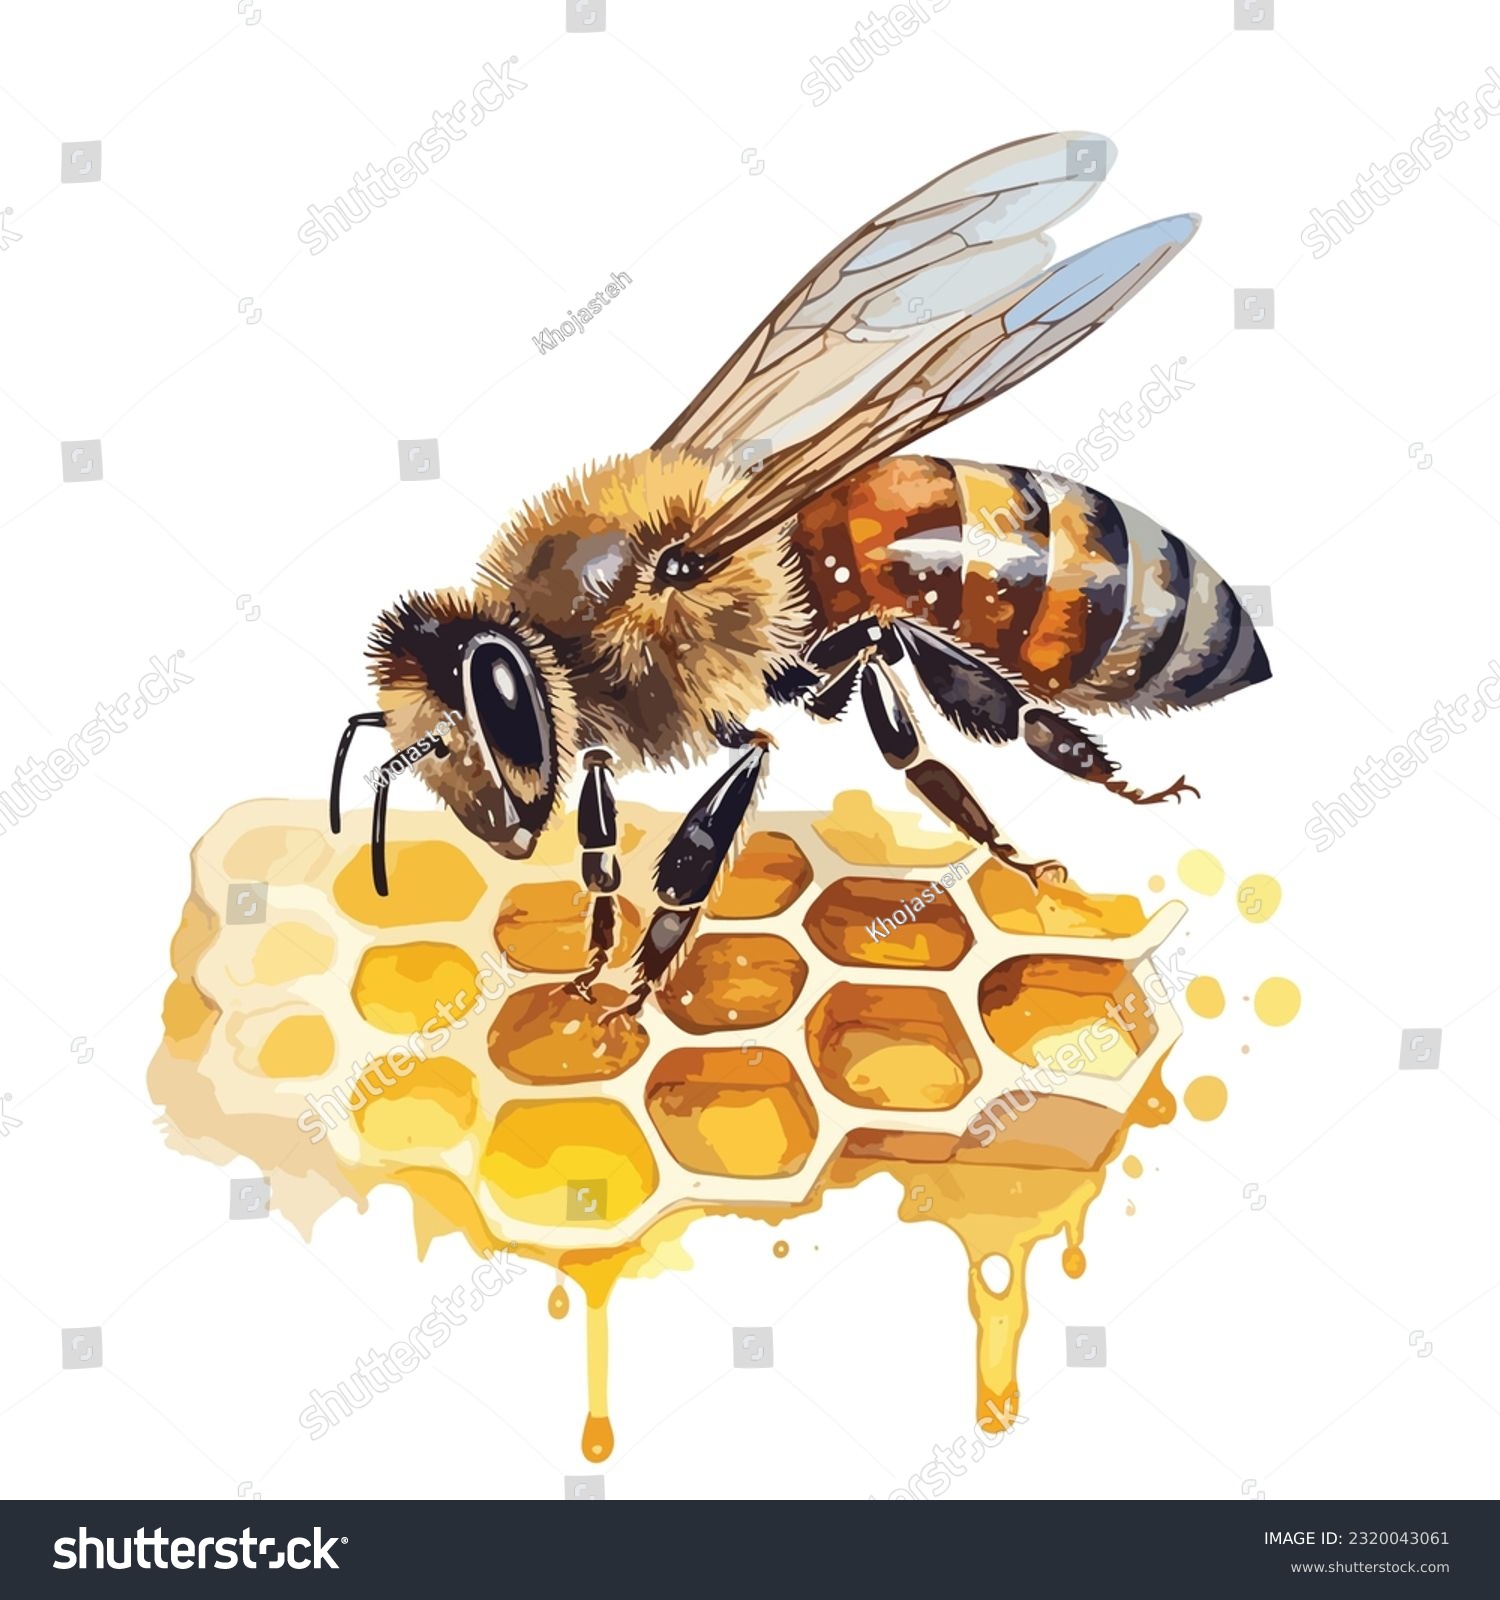 Watercolor bee honeycomb honey .vector bee illustration in watercolor style, honey hive, isolated on white background #2320043061